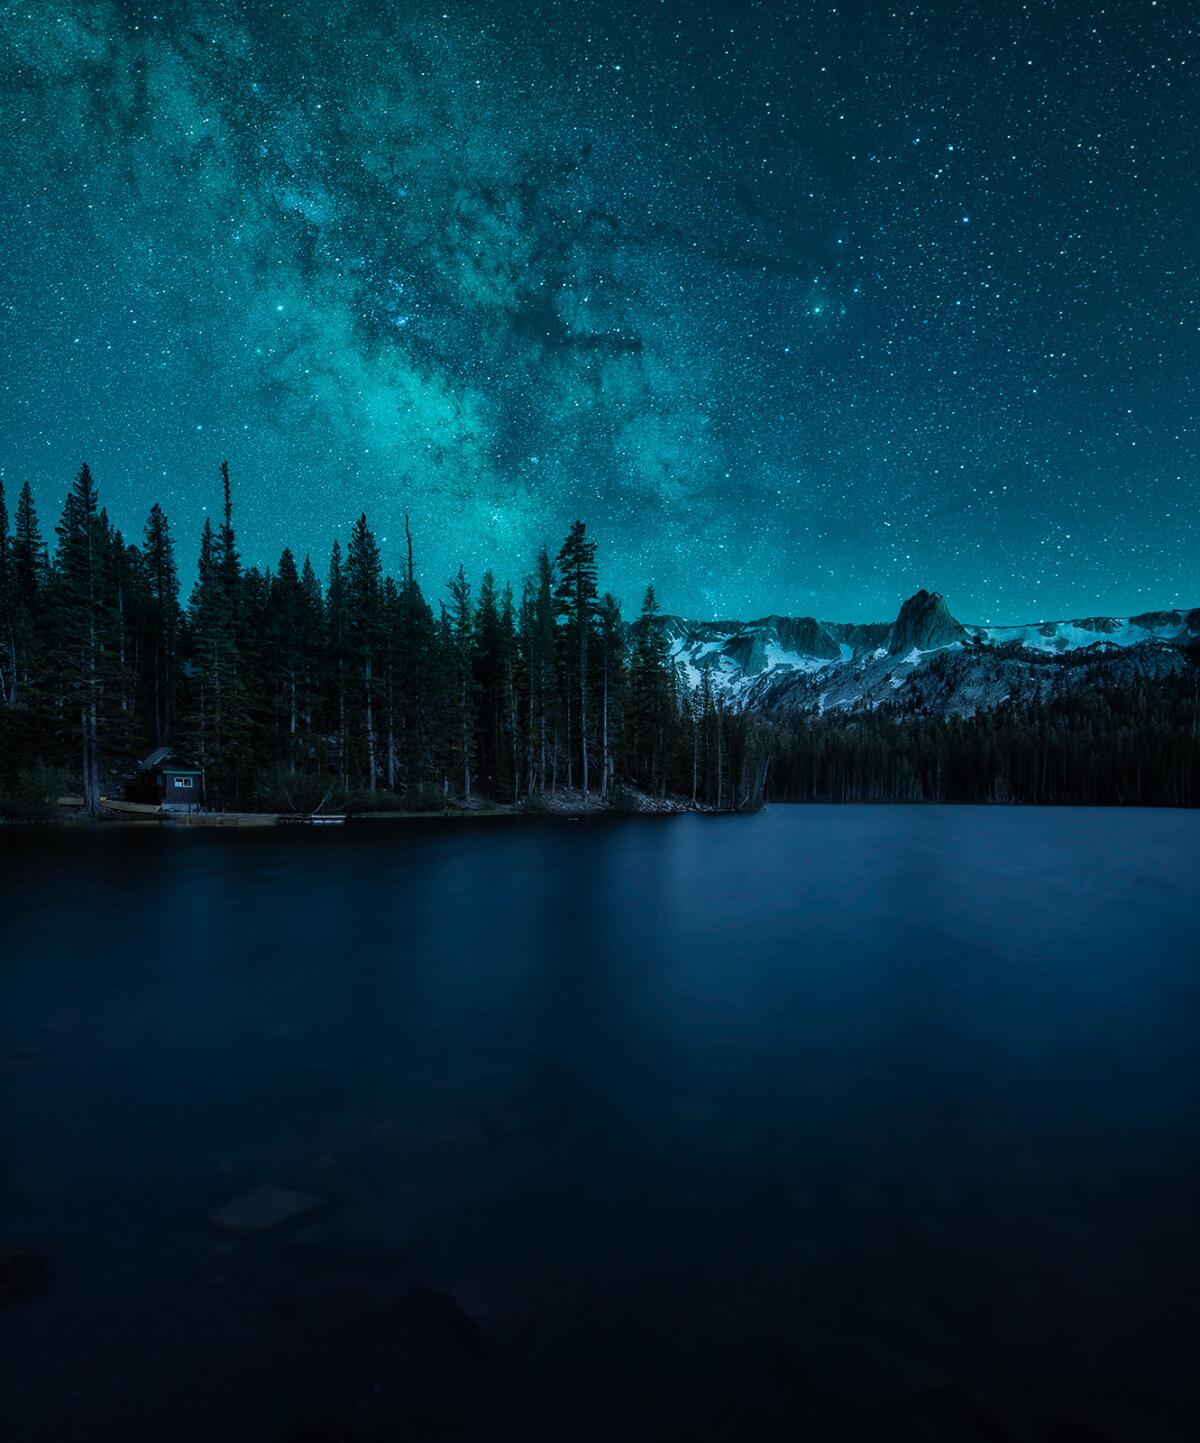 Mammoth Lakes | Ken Lee, Los AngelesBy day, Lee is a special education teacher. Off the job, he’s spent years developing his night-photography skills. He made this Lake Mamie image in the wee hours while on vacation in June. He used a Nikon D750, tripod, long exposure, high ISO and complicated night-photography techniques.